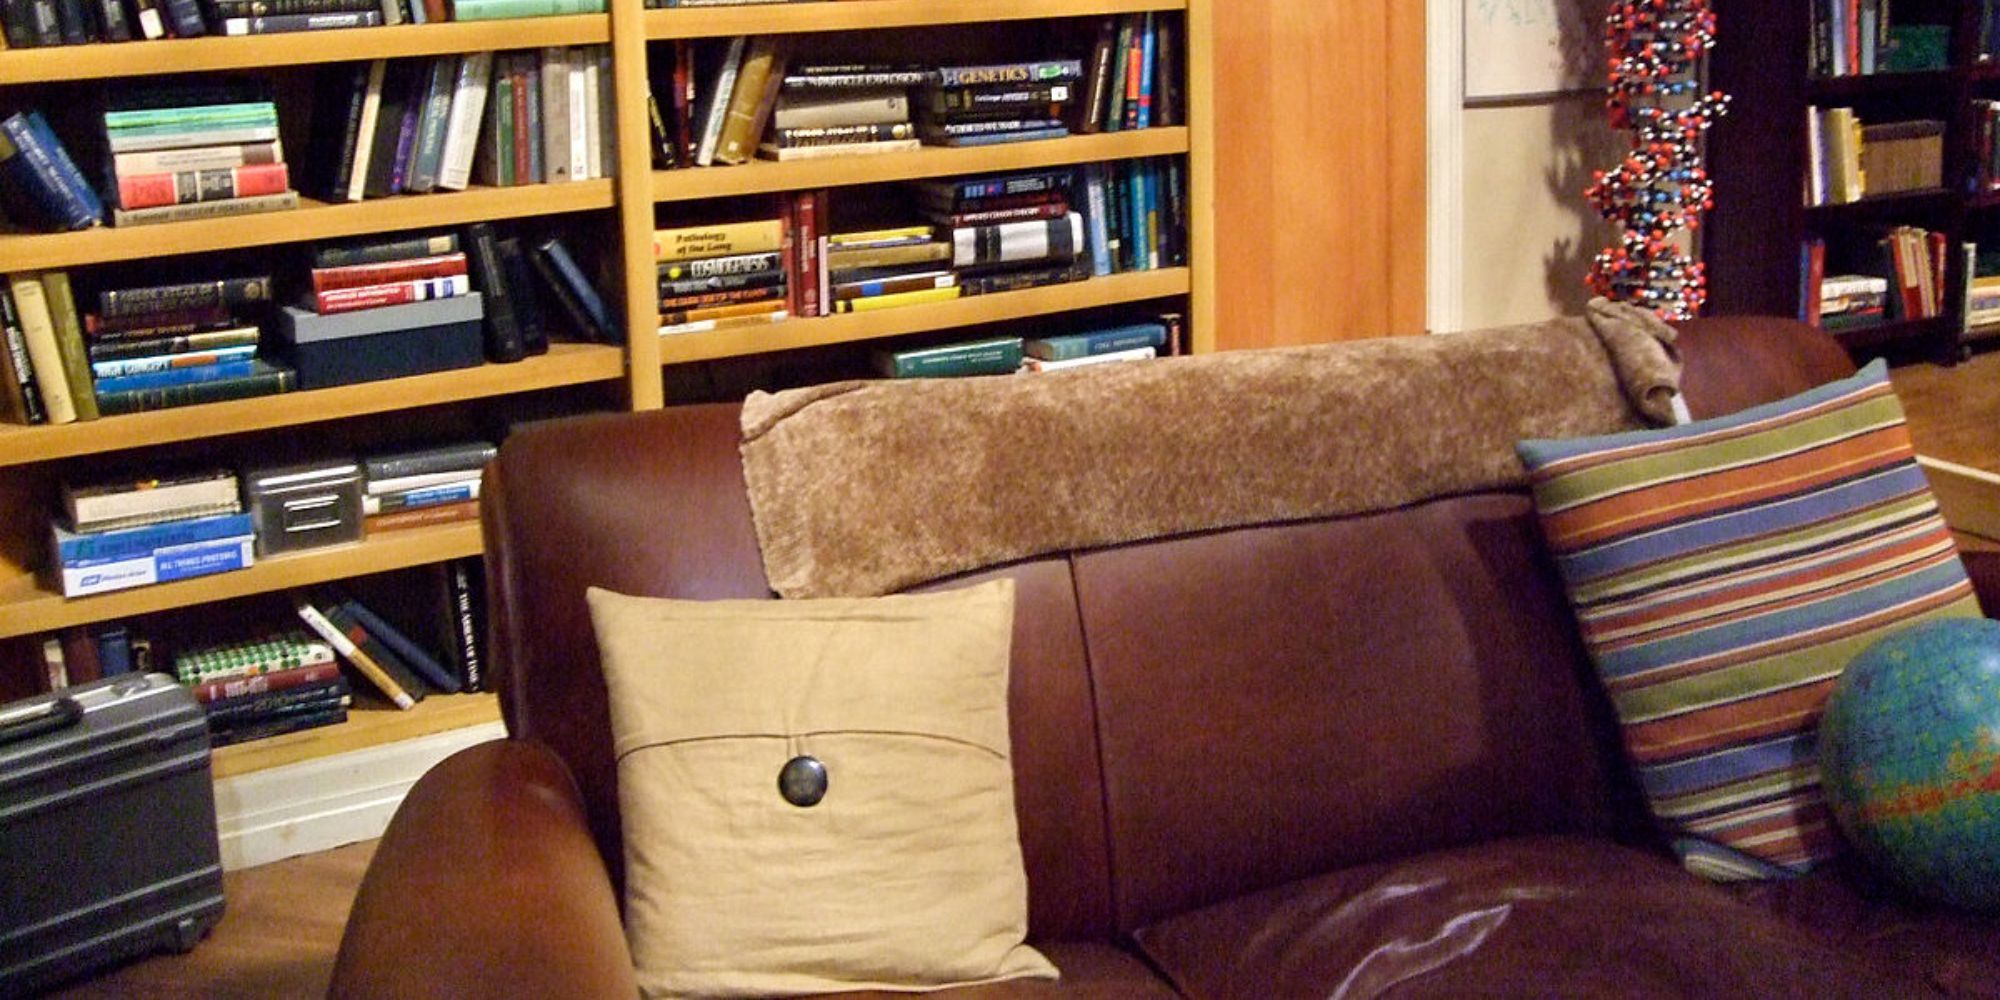 A close-up of Sheldon's favorite spot on the couch in The Big Bang Theory